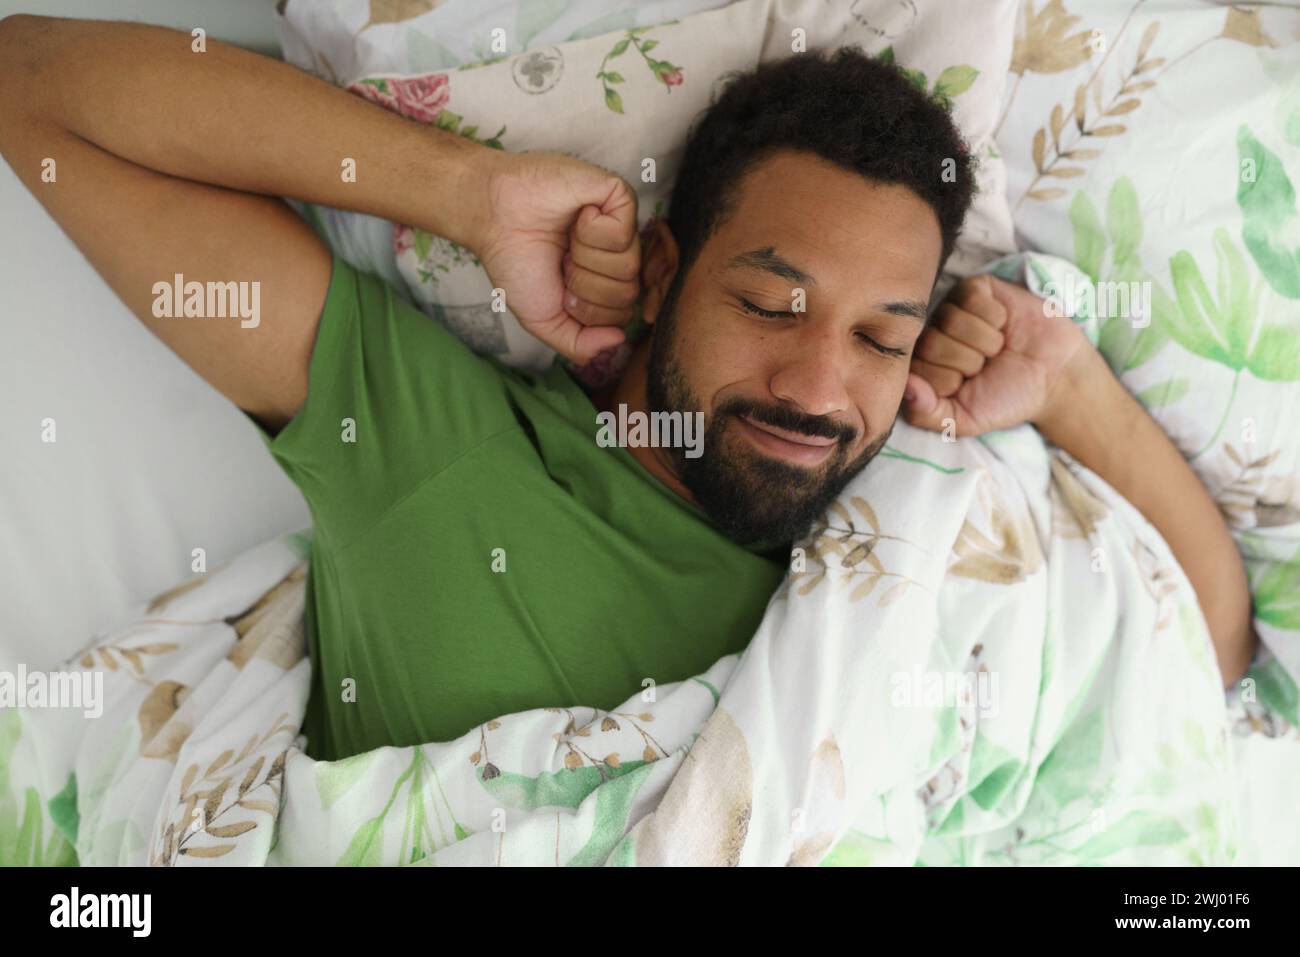 Top view of man waking up in bed, stretching arms, smiling in the morning. Stock Photo